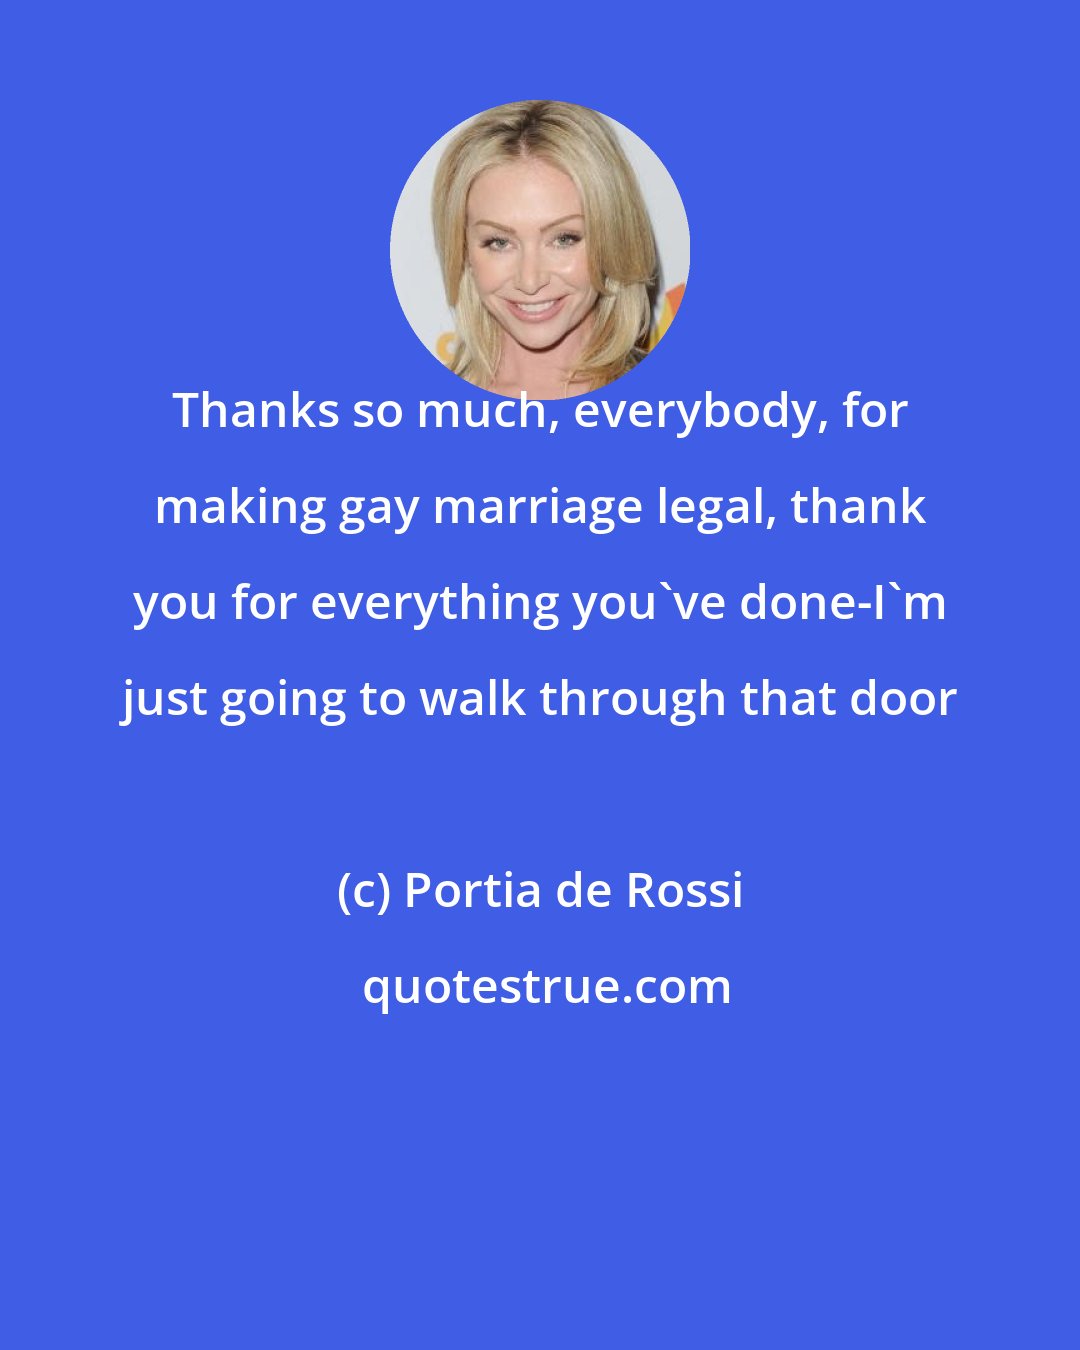 Portia de Rossi: Thanks so much, everybody, for making gay marriage legal, thank you for everything you've done-I'm just going to walk through that door